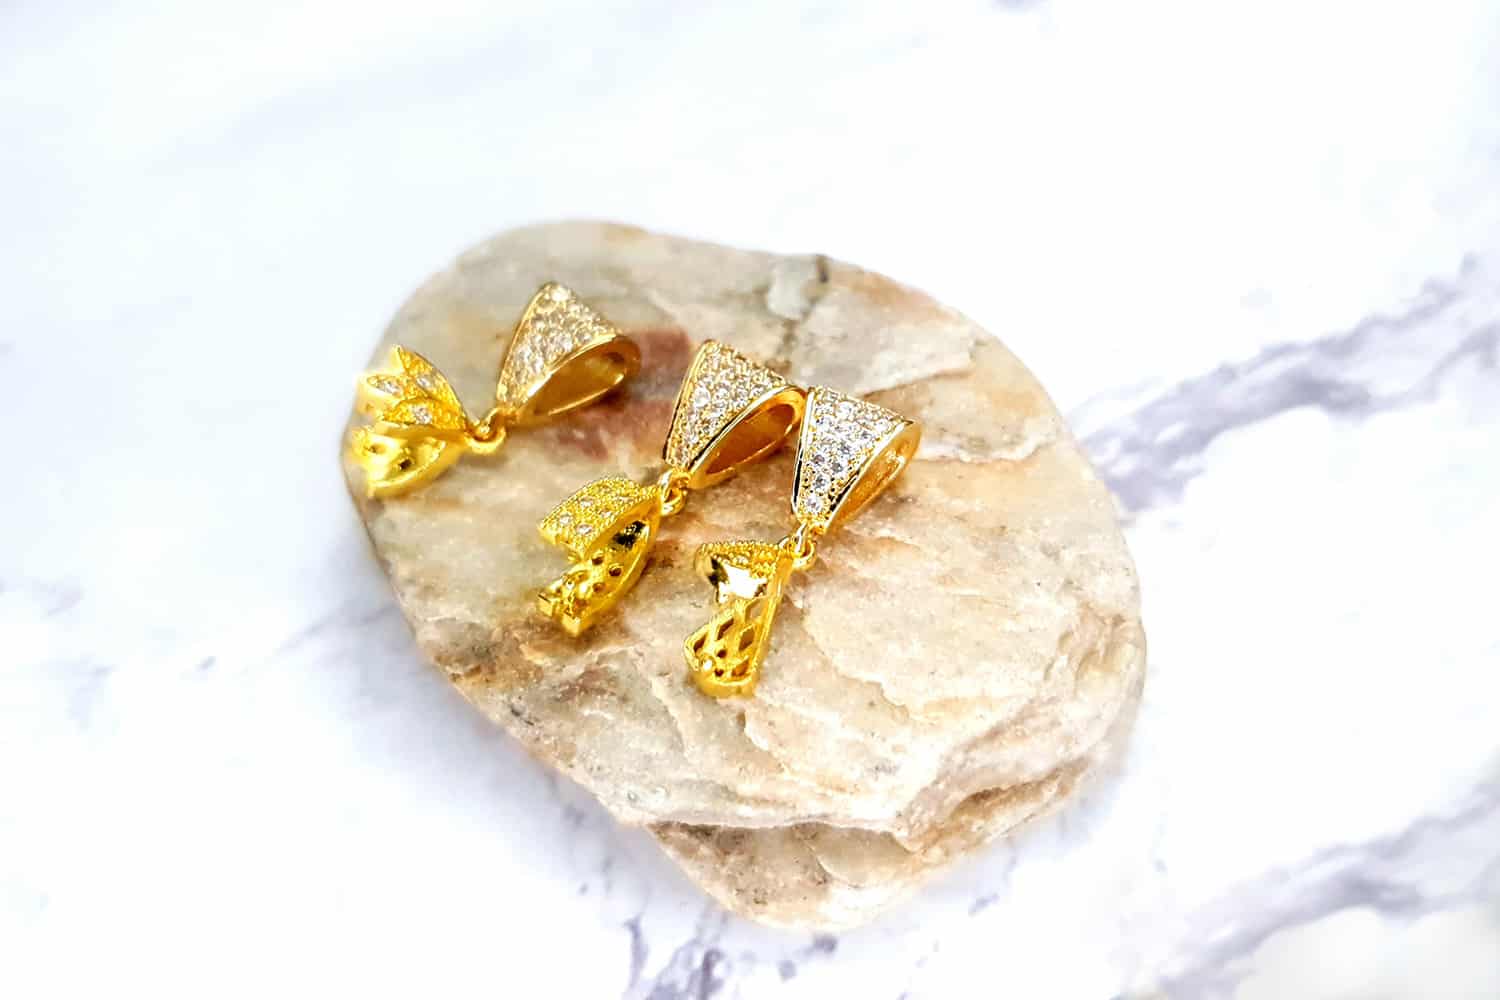 3 high quality golden crystals pendant pinch bail (25373)